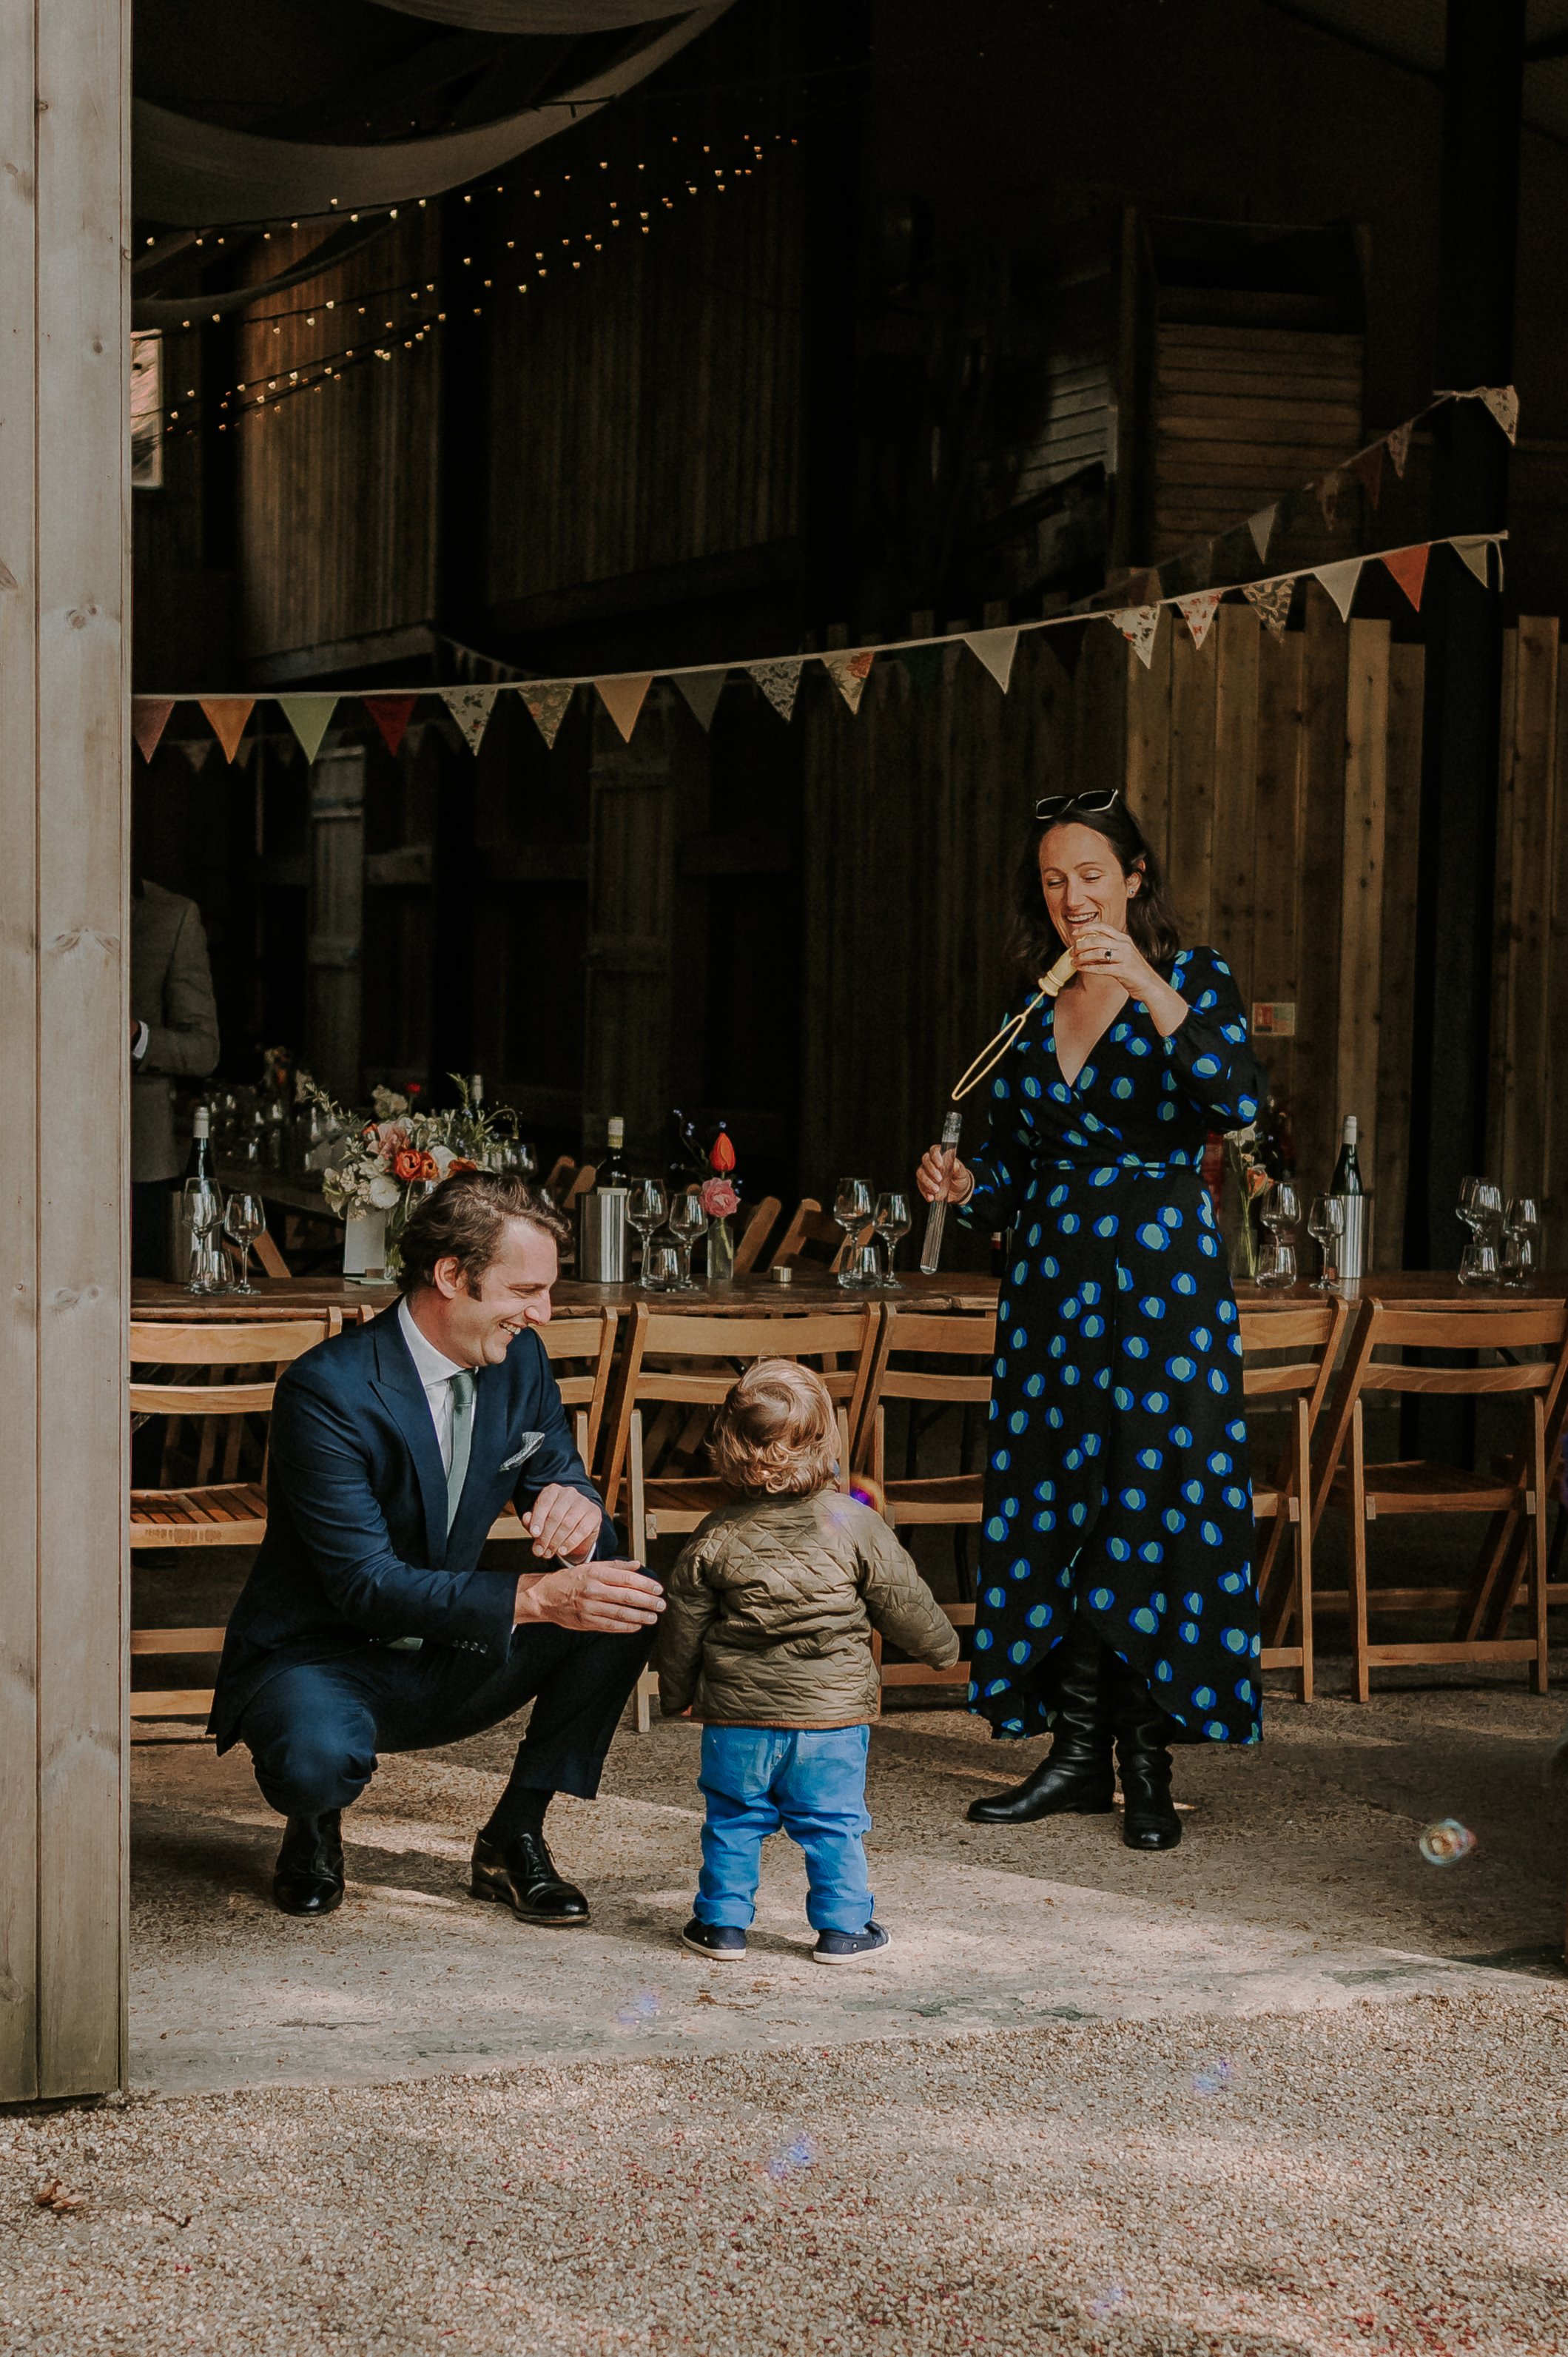 A Mother and Father Blow Bubbles for their Child during a Wedding Reception at Happy Valley Norfolk